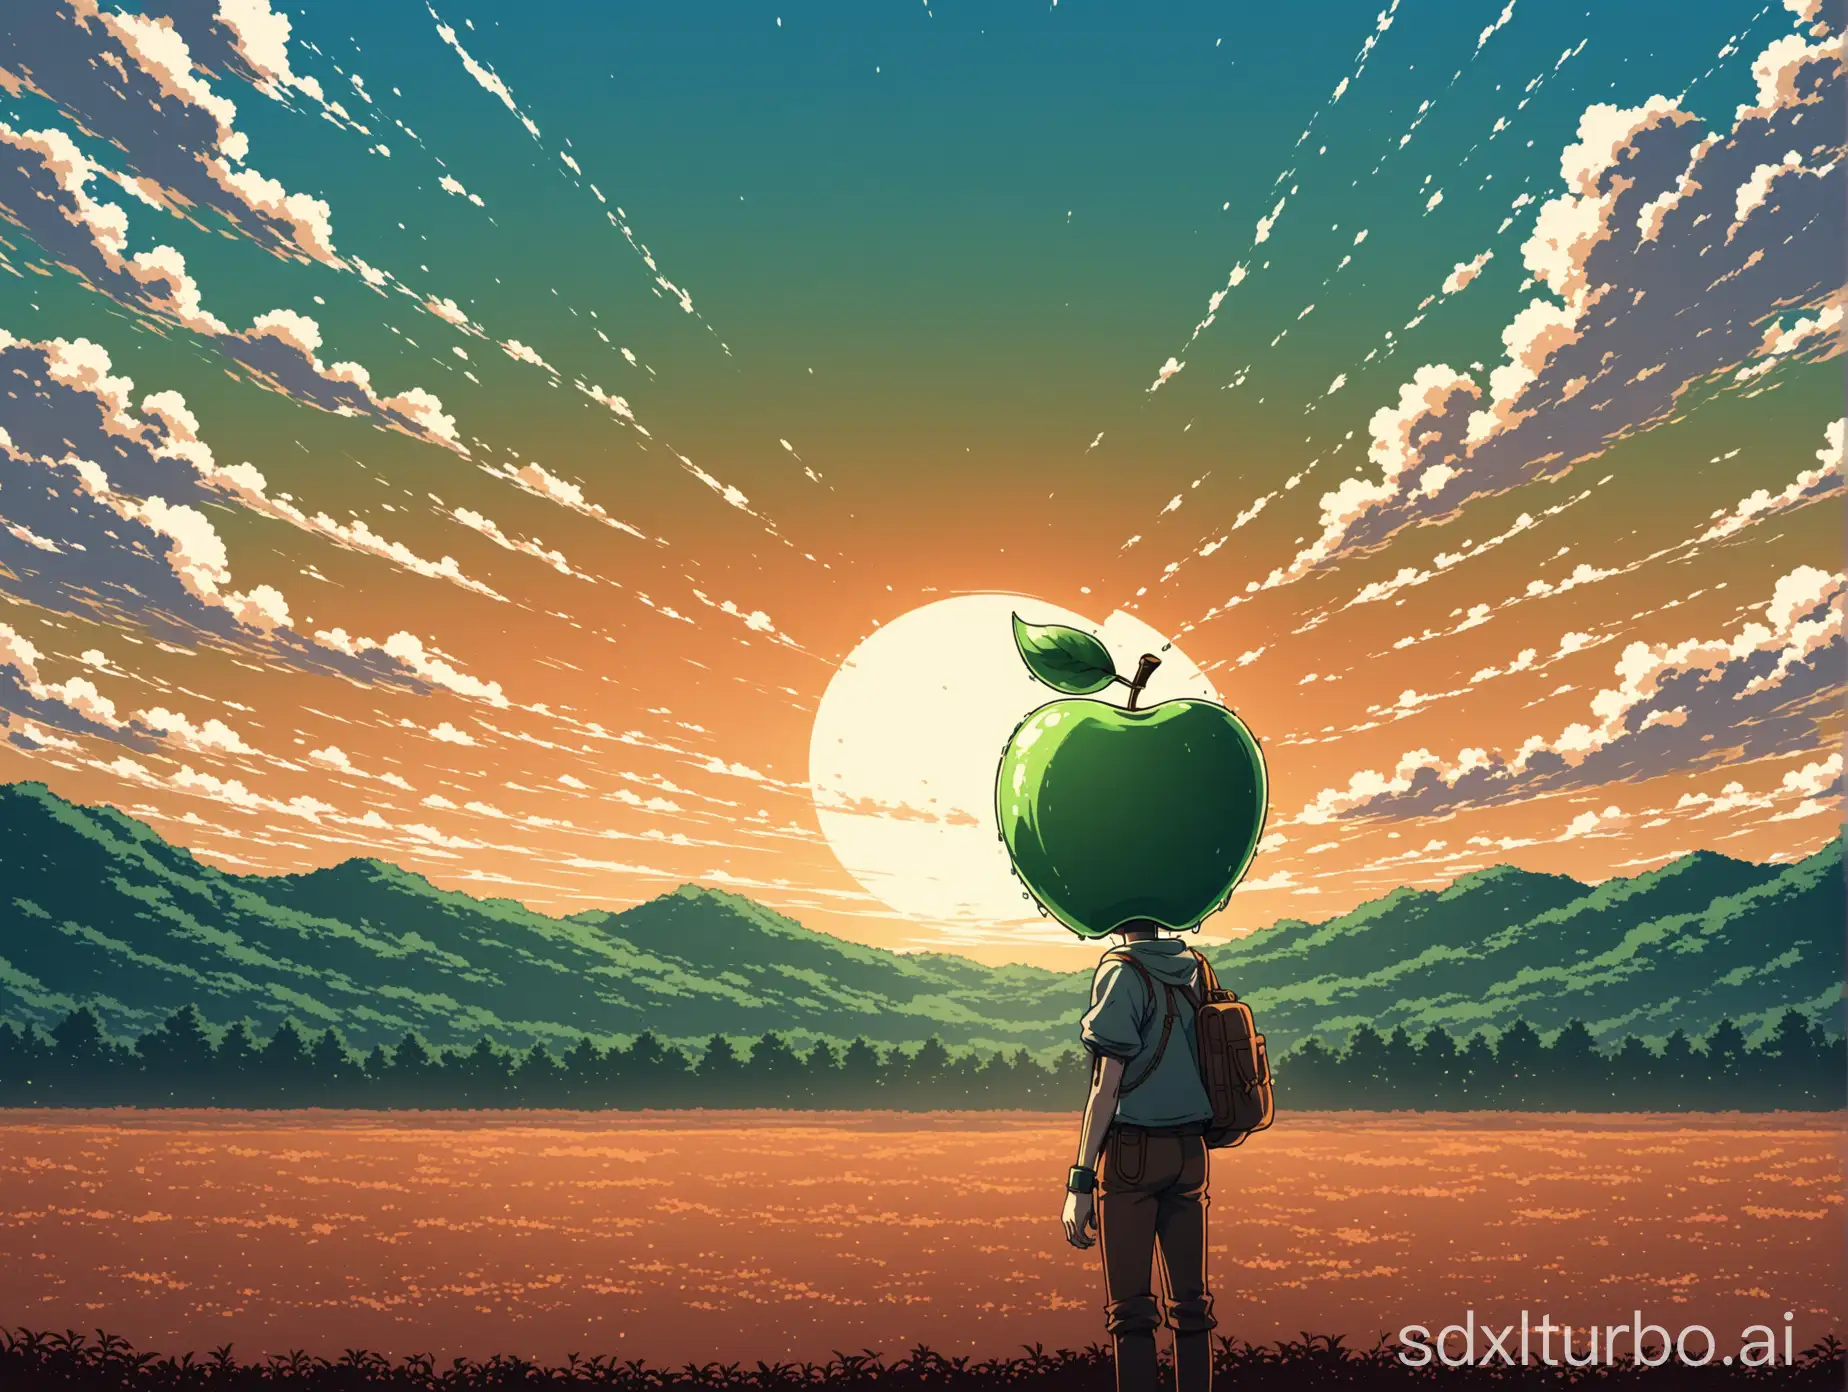 apple gets oxidized, exaggerate a bit, 2D anime style